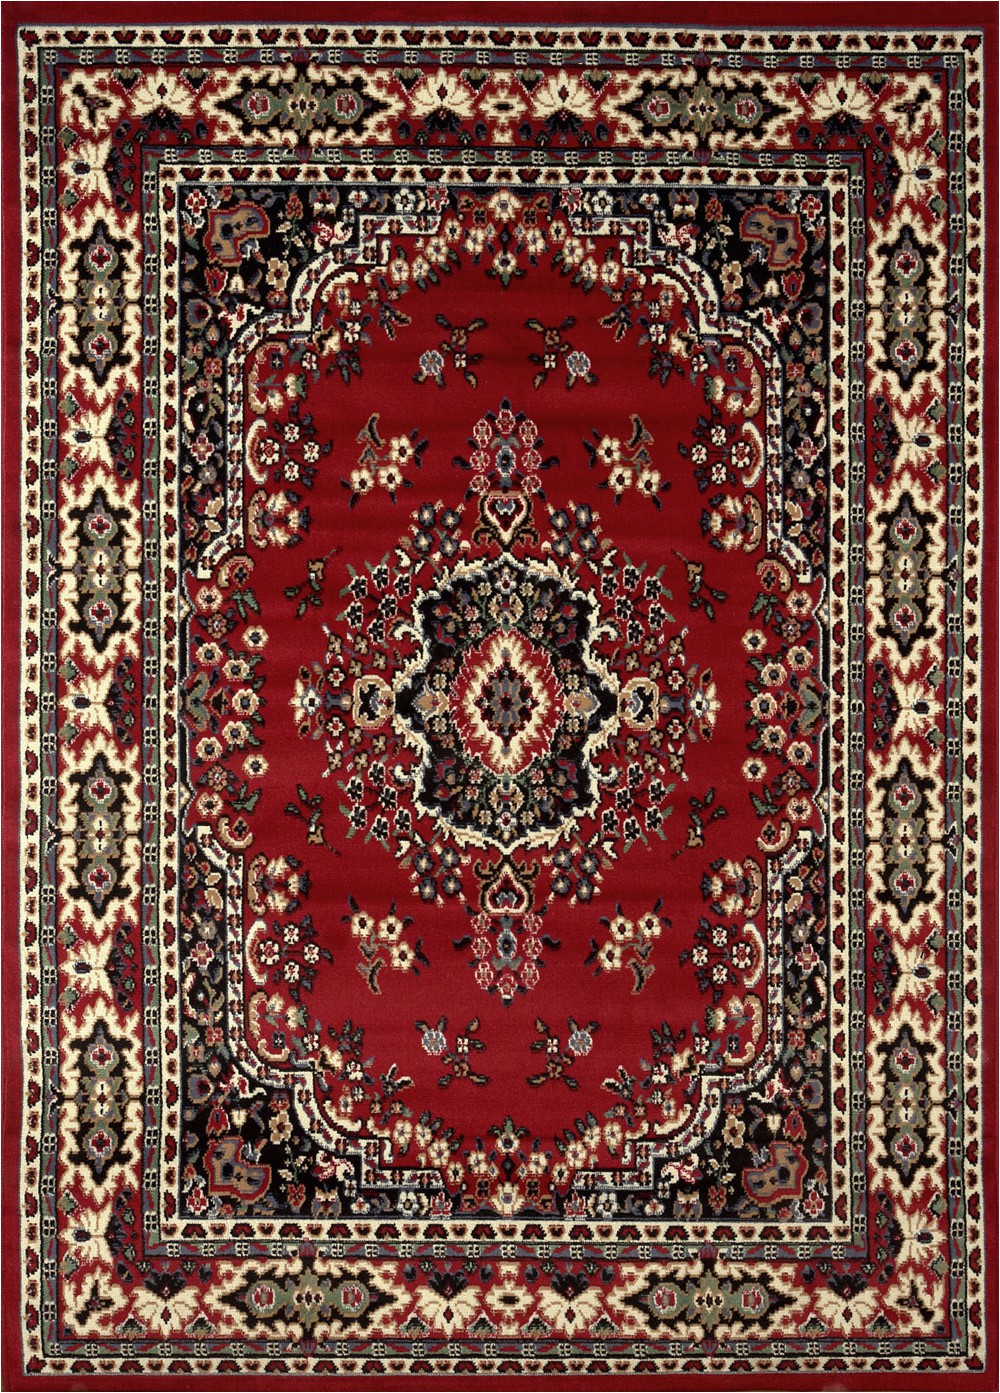 Area Rugs for Sale On Ebay Traditional 8×11 oriental area Rug Persien Style Carpet Approx 7 8"x10 8"